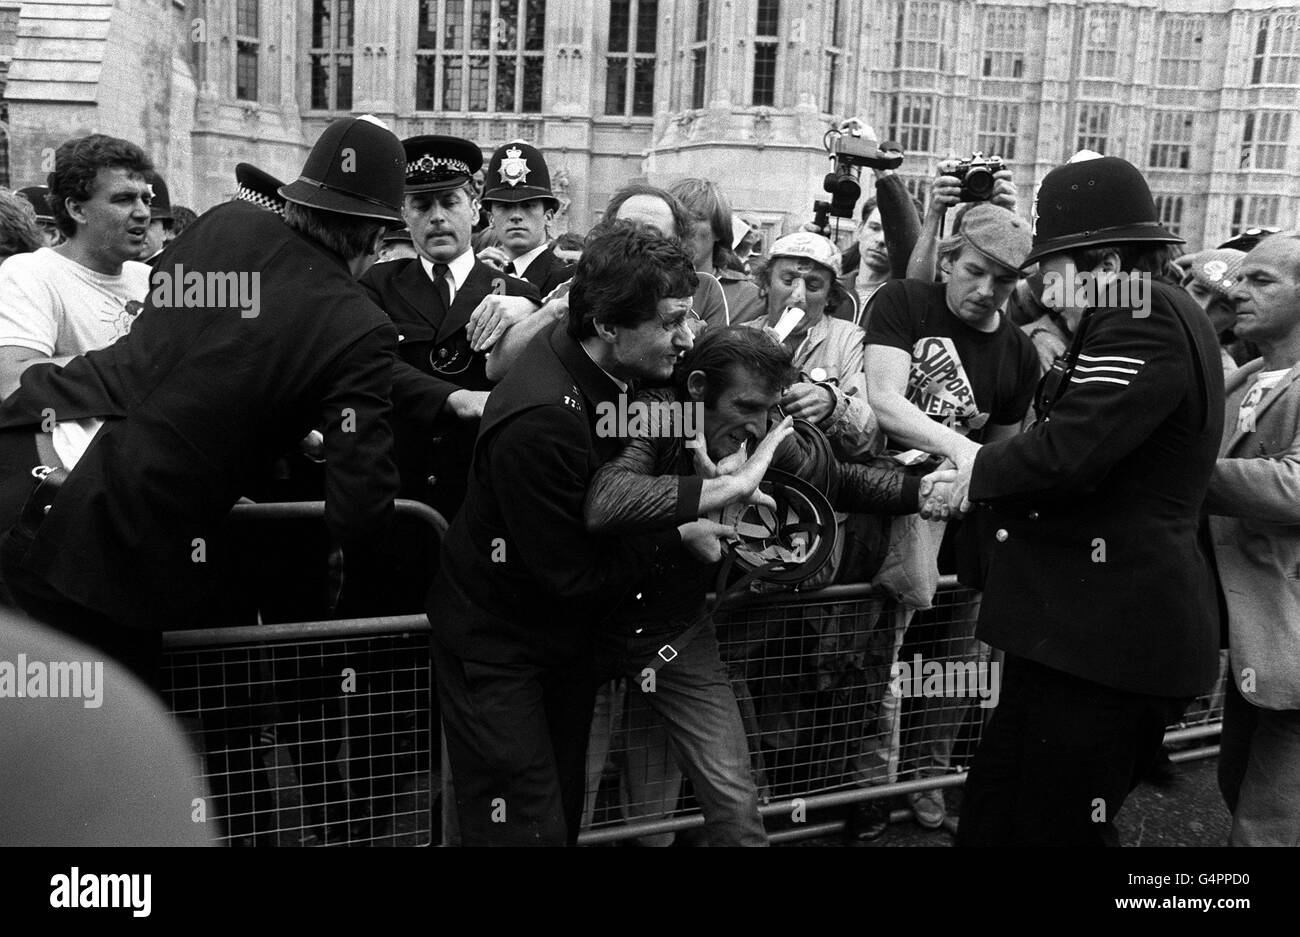 Miners strike/London protest Stock Photo